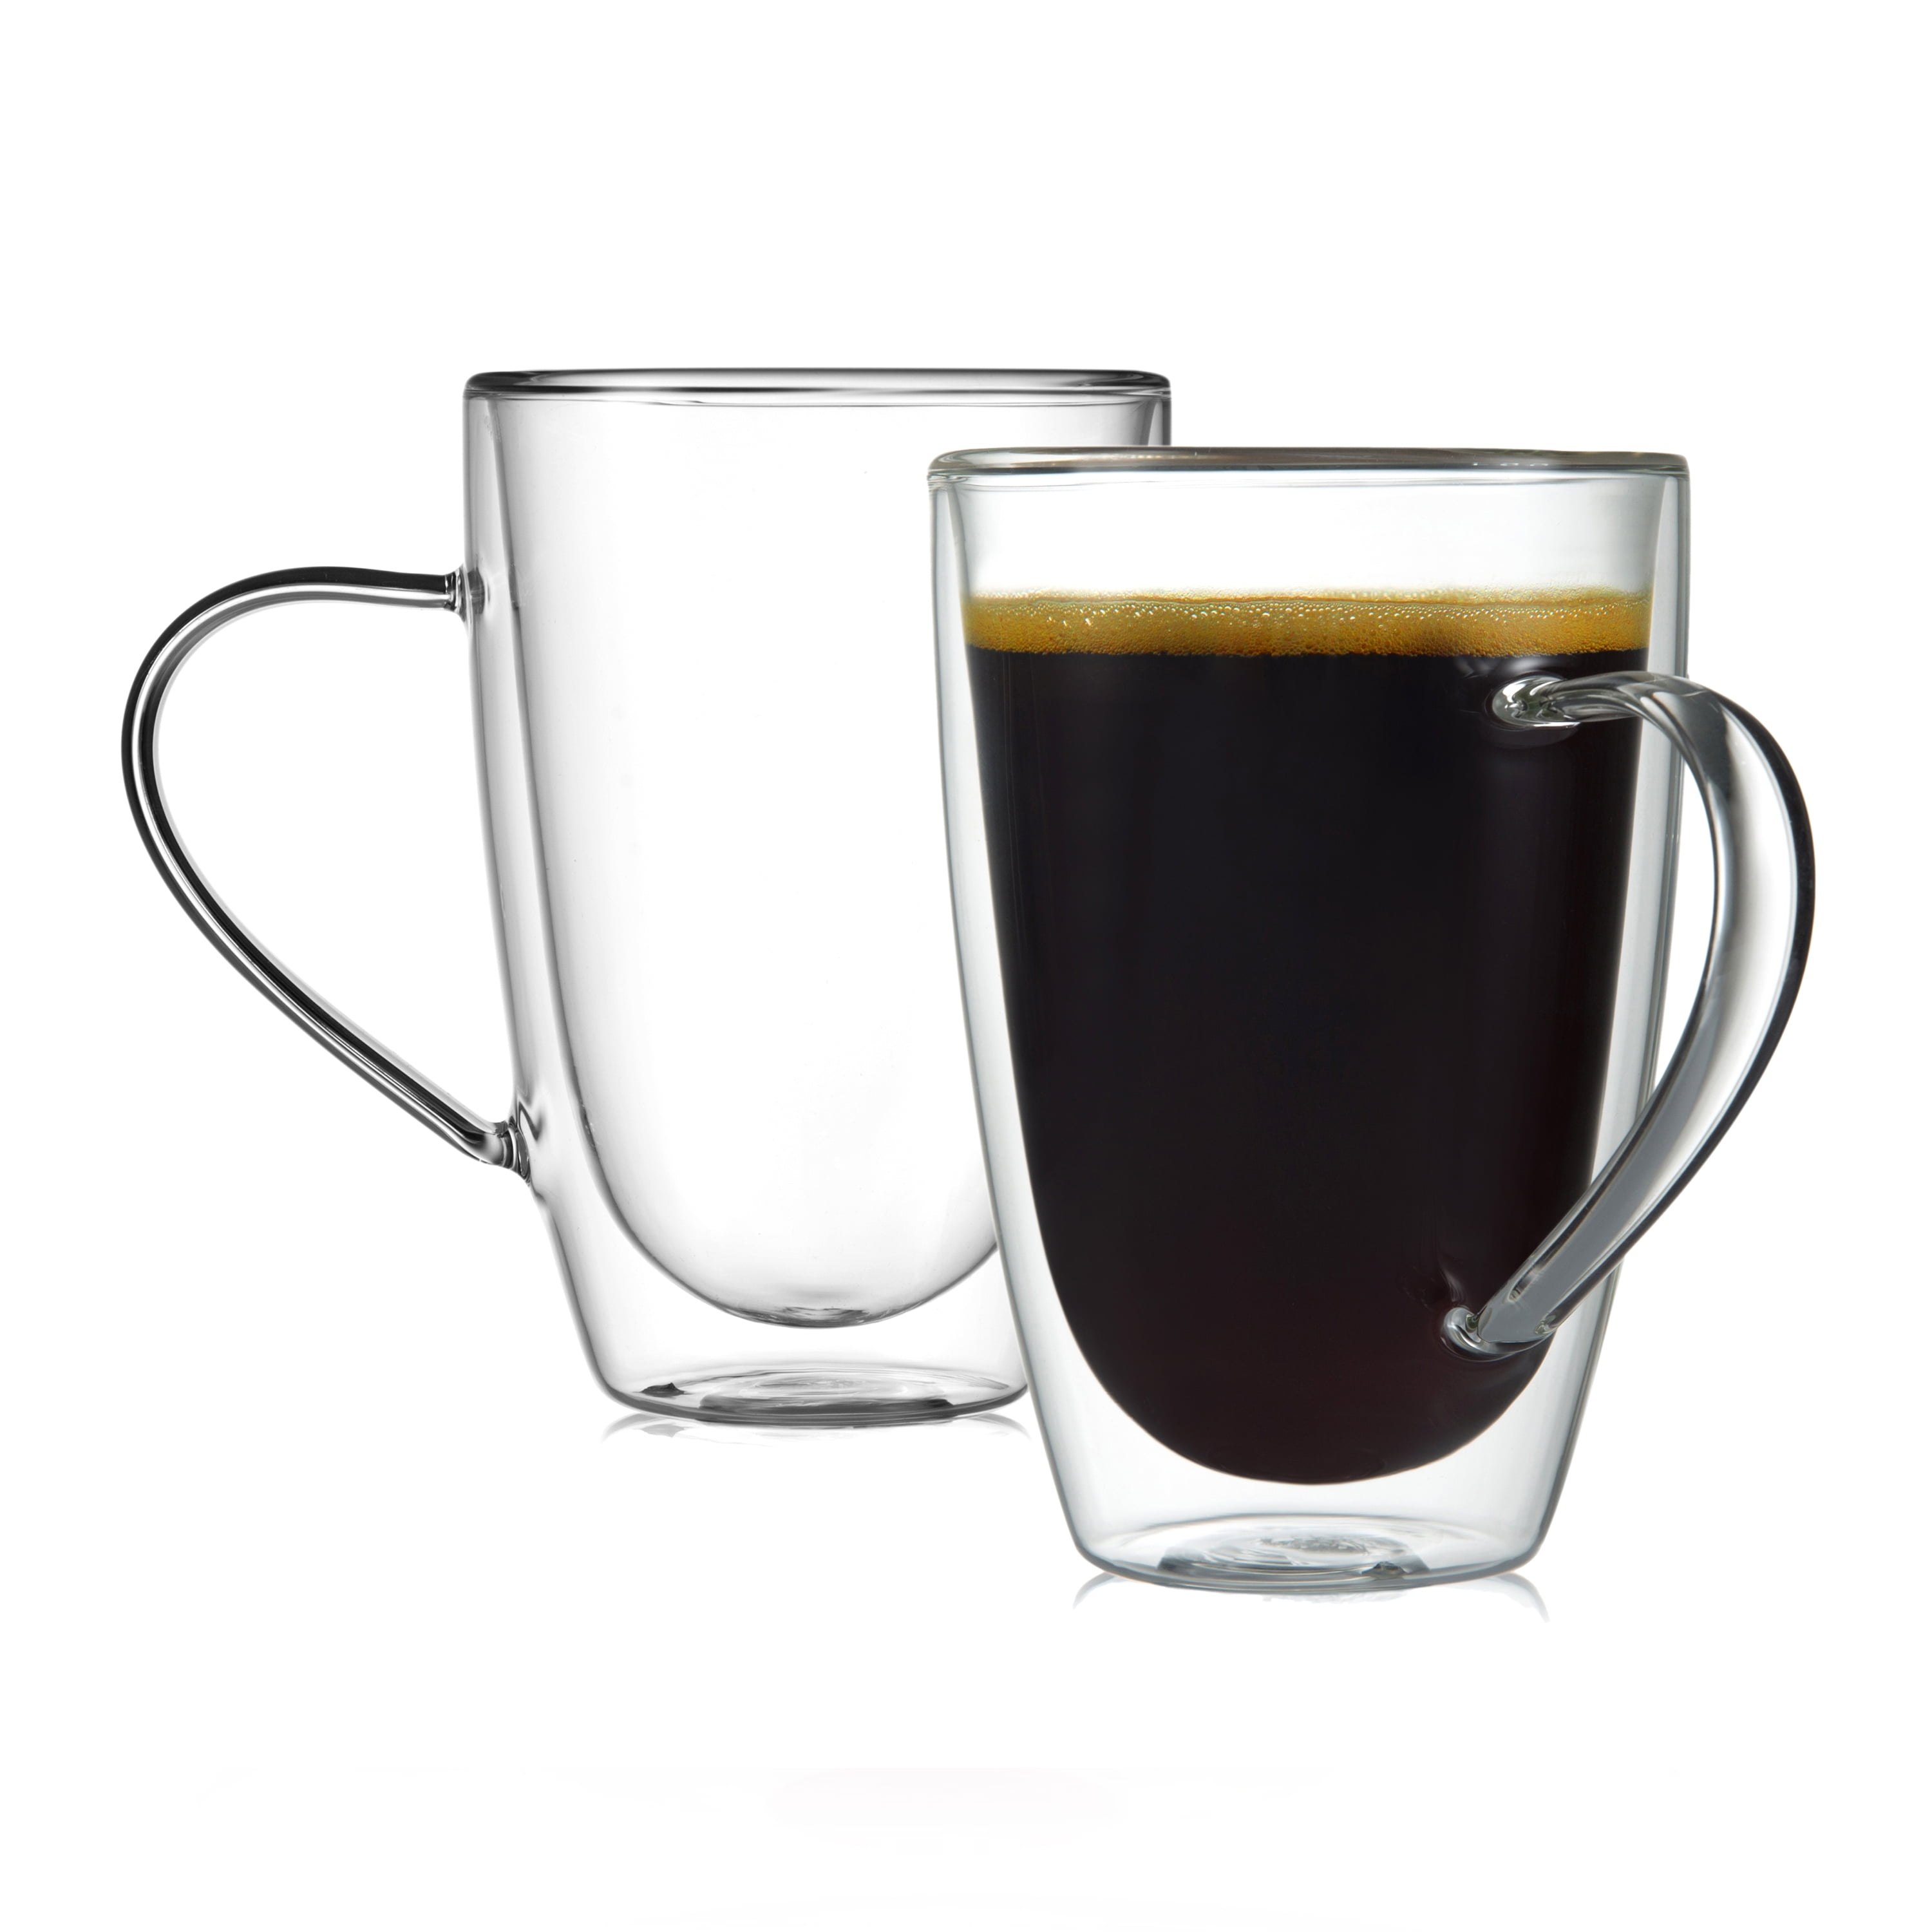 CNGLASS Double Walled Glass Coffee Mugs 10oz(290ml),Large Insulated Espresso Cups,Set of 4 Clear Cappuccino Mug with Handle, Size: Small, Silver